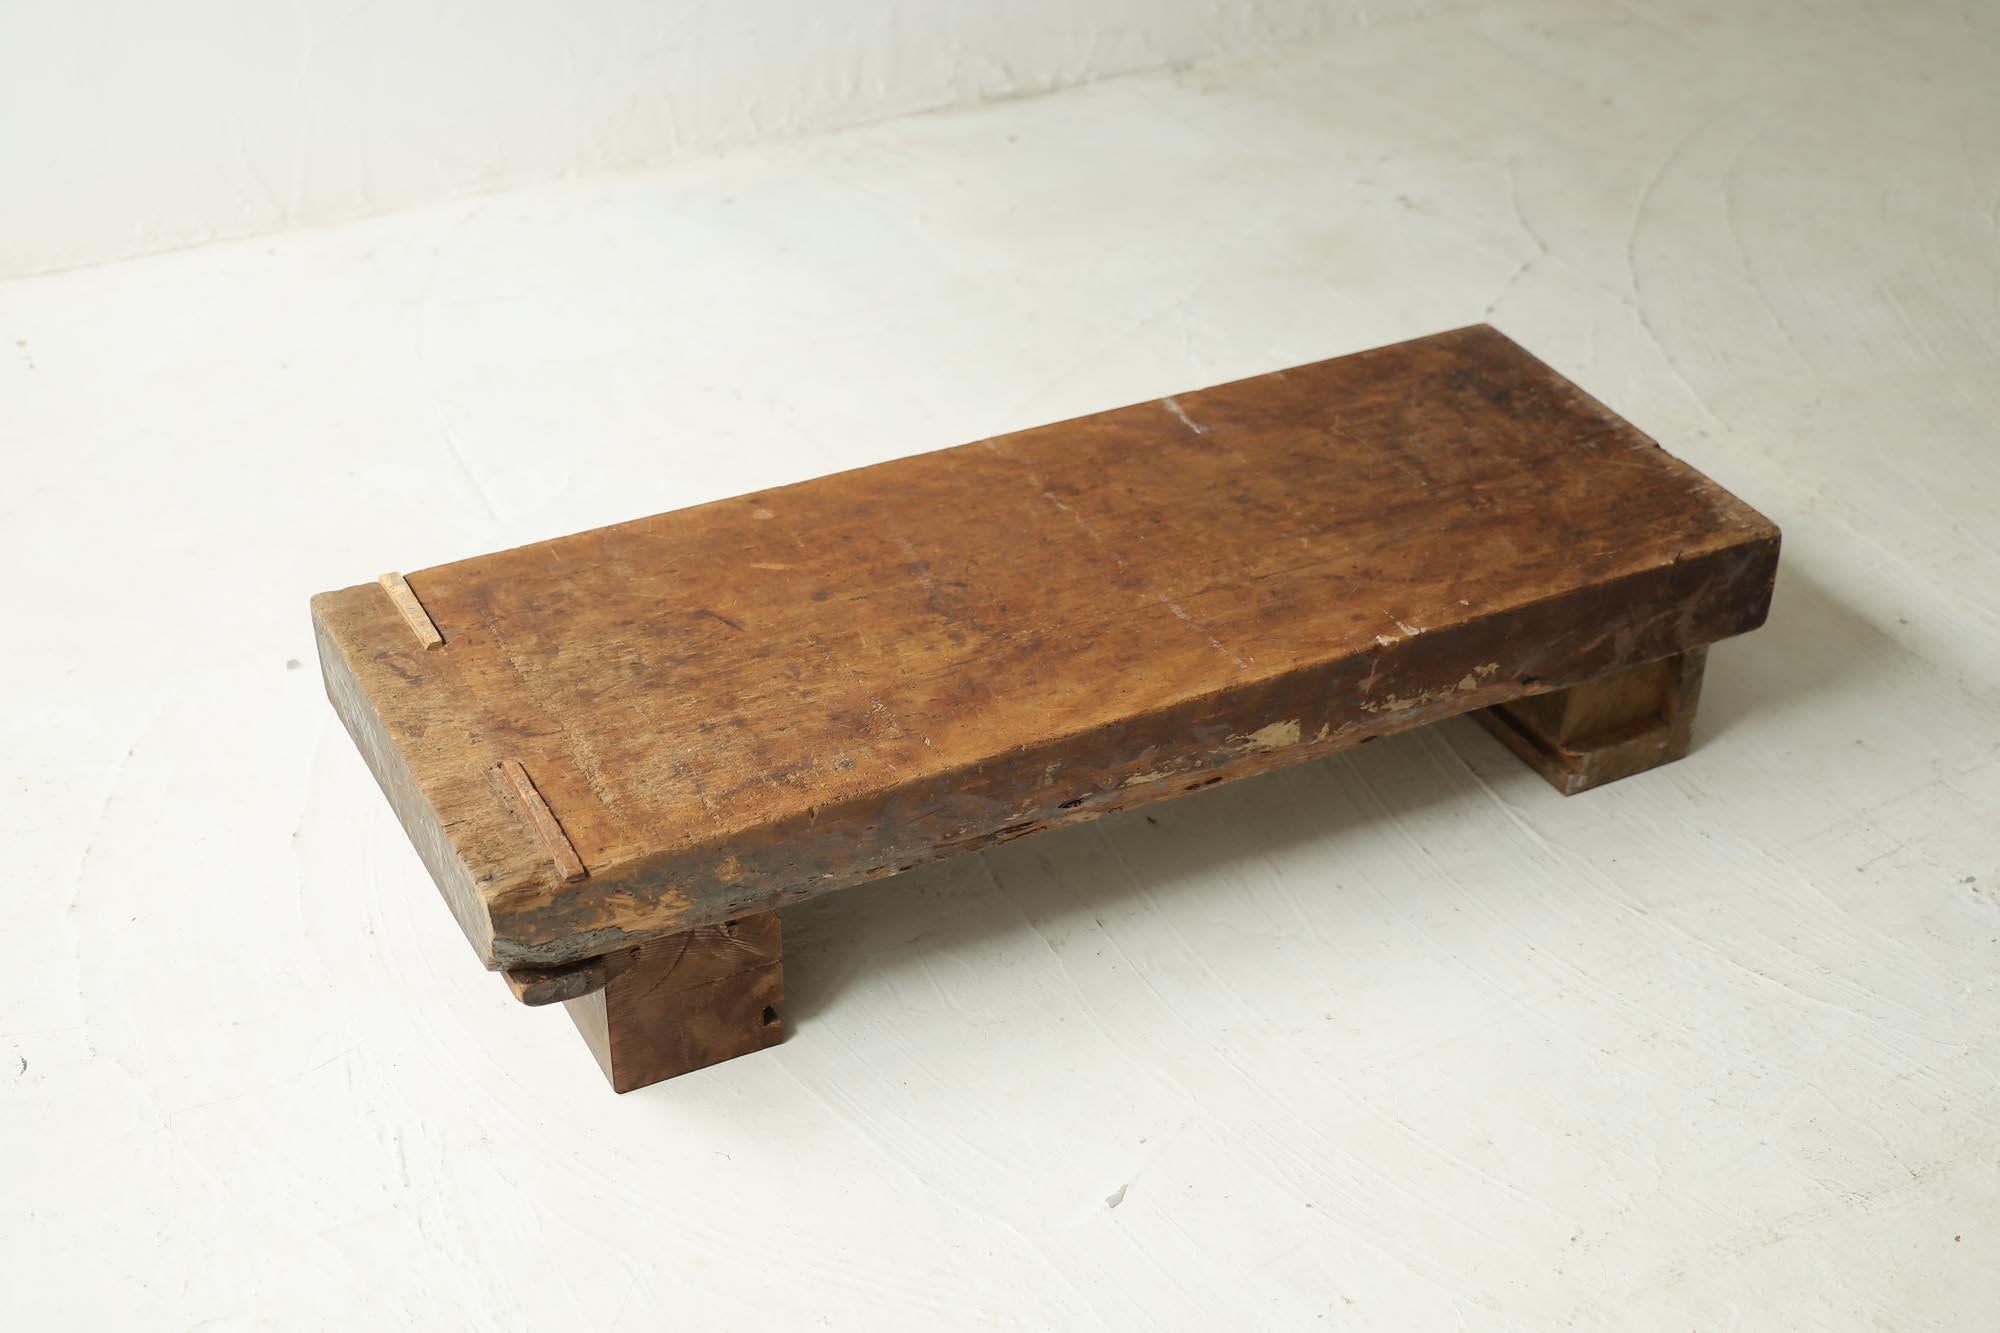 Hand-Carved Wooden Low Table, Japanese Antique, Wabi-Sabi, Mingei